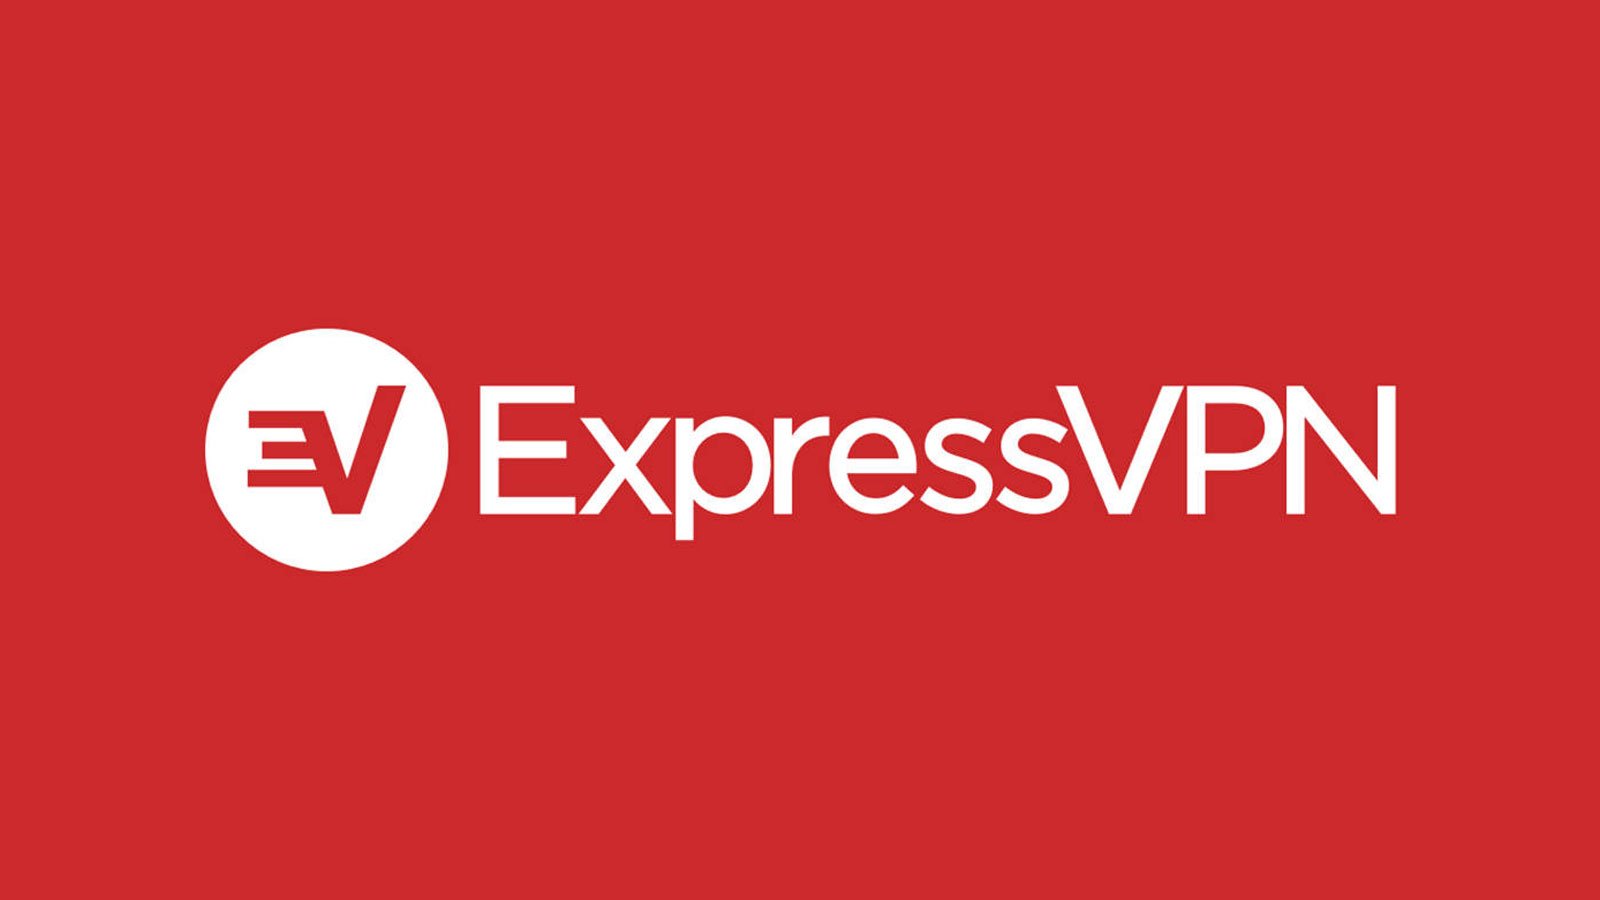 Express VPN: The Best, Fastest, and Most Trusted in 2023!